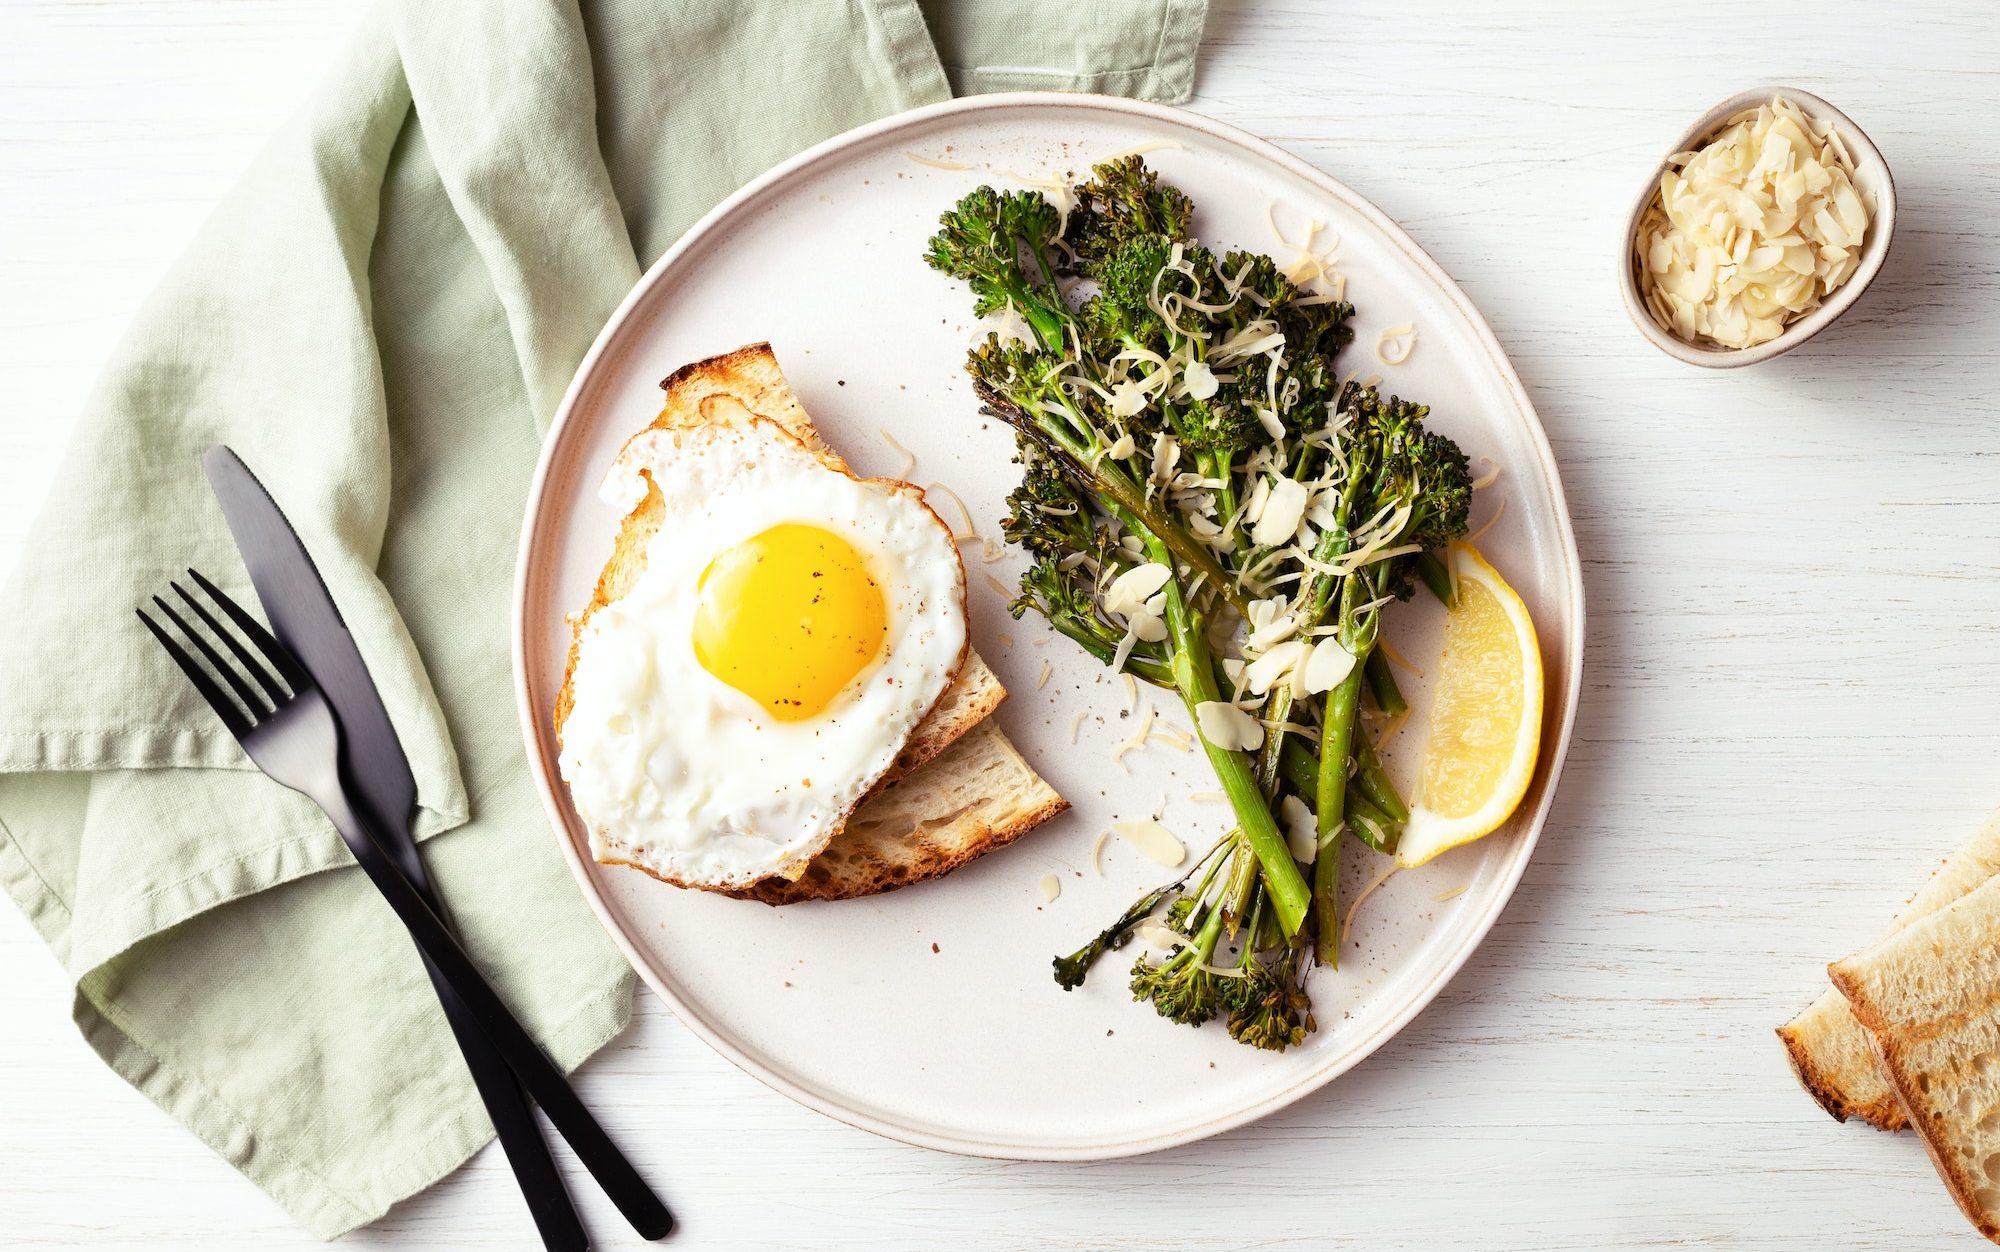 Healthy Breakfast with Broccolini, Fried Egg and Tost.